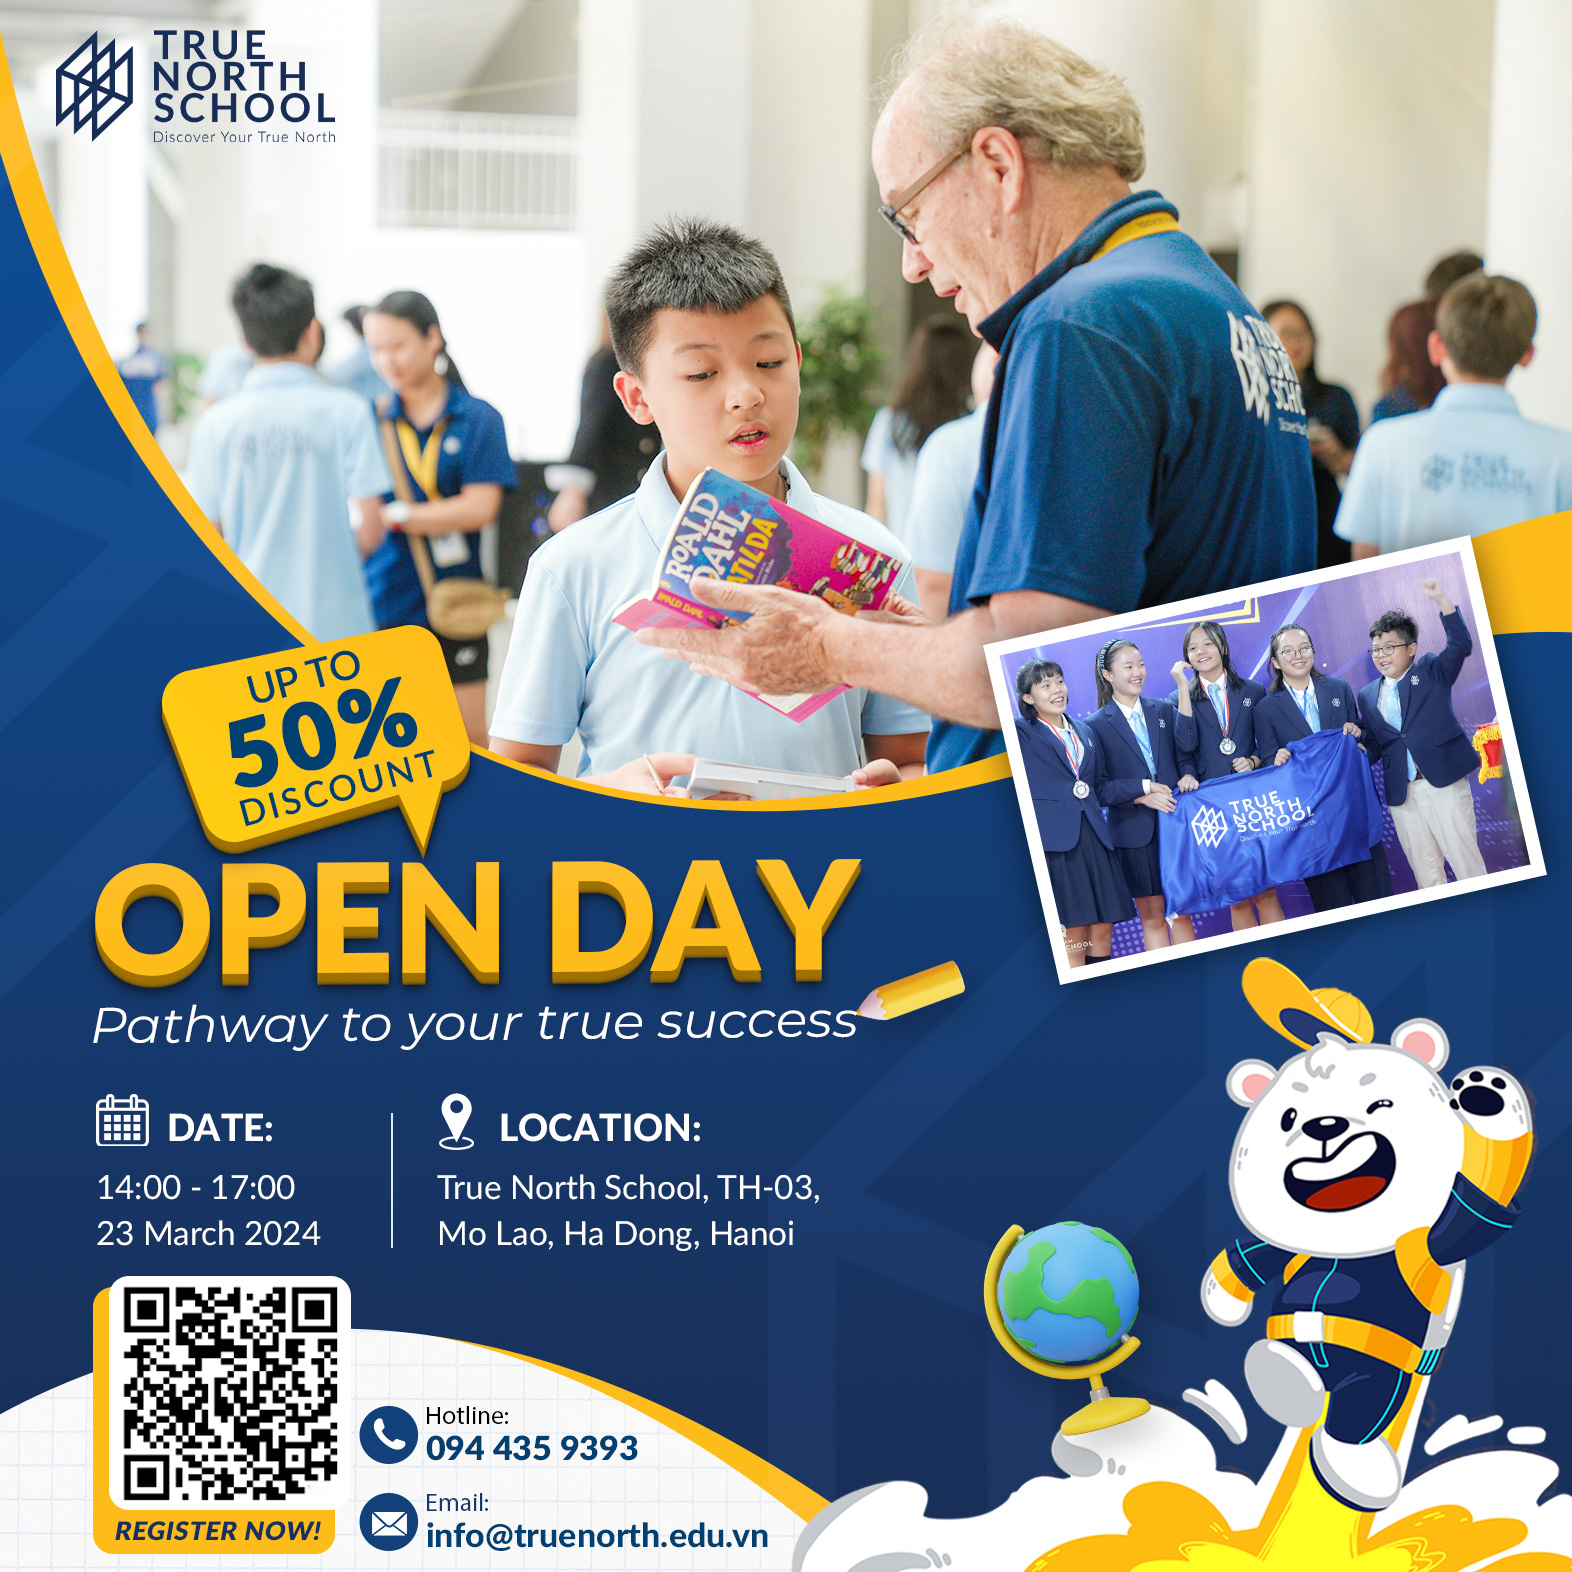 Open Day: Pathway To Your True Success